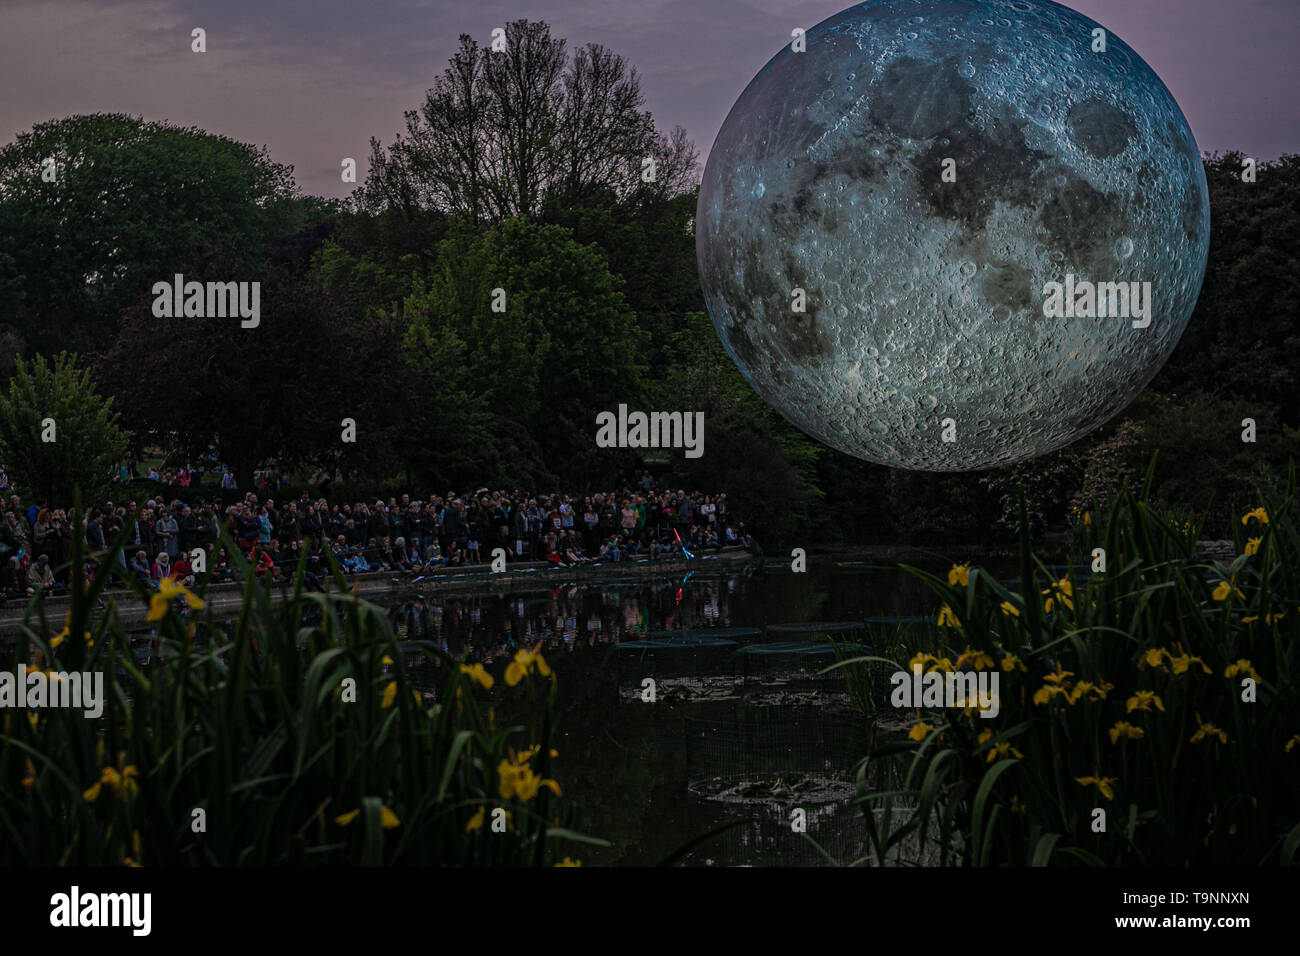 May 18, 2019 - Artist Luke Jerram's 7 metre diameter inflatable moon is suspended over the pond at Queens Park in Brighton during the Brighton Festival. The illuminated lunar model is one of several copies that tour the world for Luke's temporary exhibition. It features detailed NASA images of the moon's surface, with every centimetre of the lit sphere representing 5km of the moonâ€™s surface. The free arts event is part of the Brighton Festival, which is an annual celebration of art, music, theatre, dance, circus, and literature, which takes place in the city of Brighton and Hove during the m Stock Photo